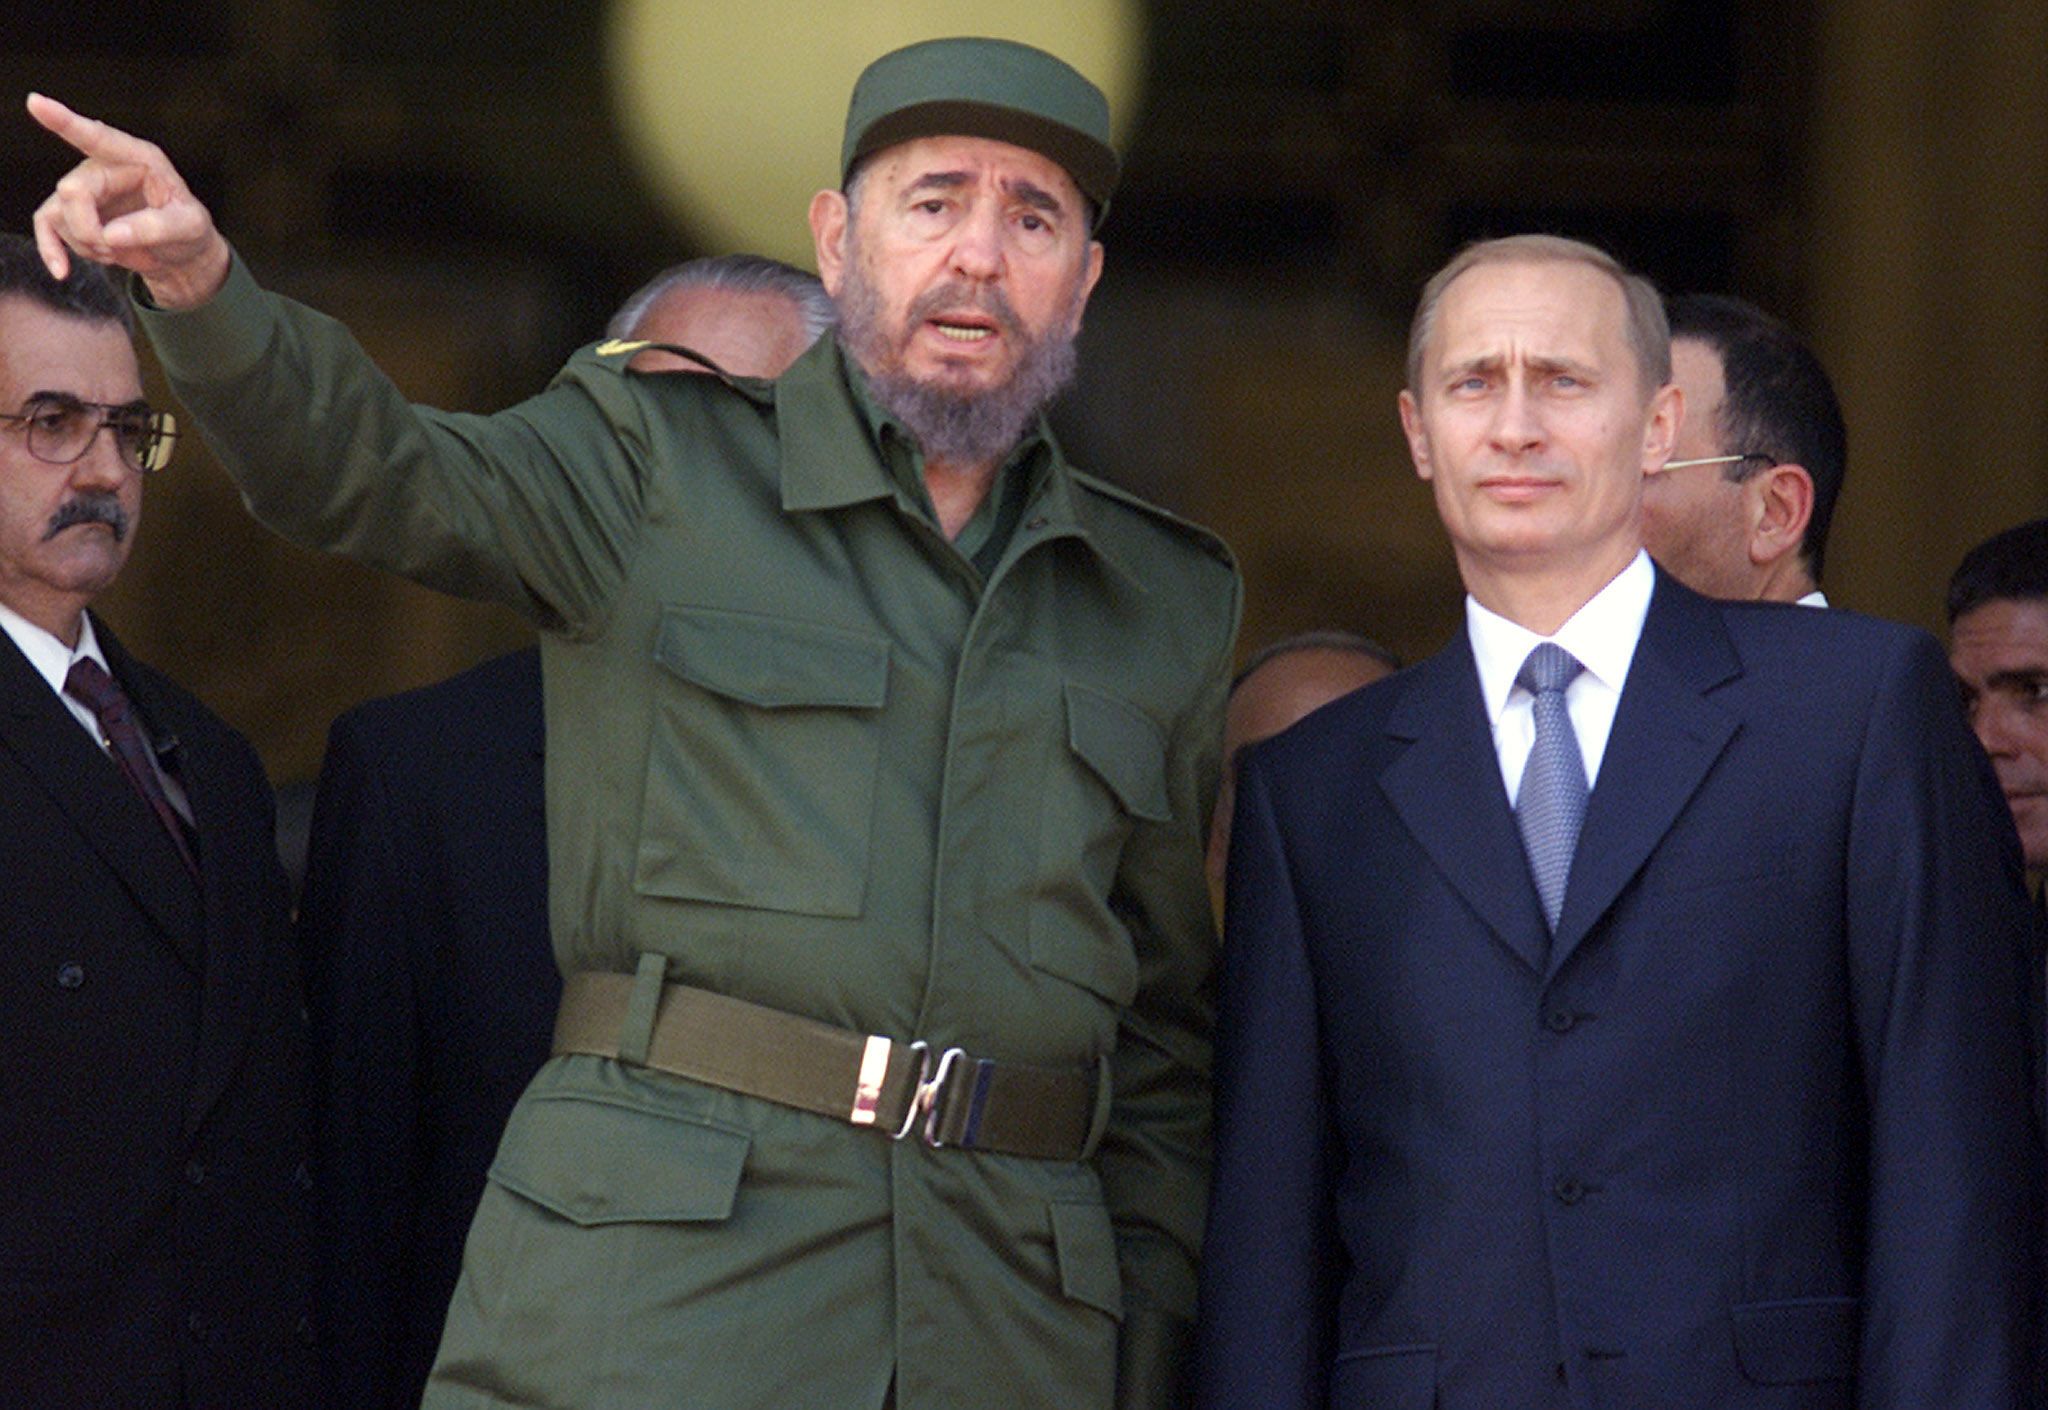 Cuban leader Fidel Castro chats with Putin at the top of the steps of Havana's Palace of the Revolution during Putin's official welcoming ceremony in December 2000. Putin was on a four-day official visit to Cuba, the first by a Russian leader since the collapse of the Soviet Union.